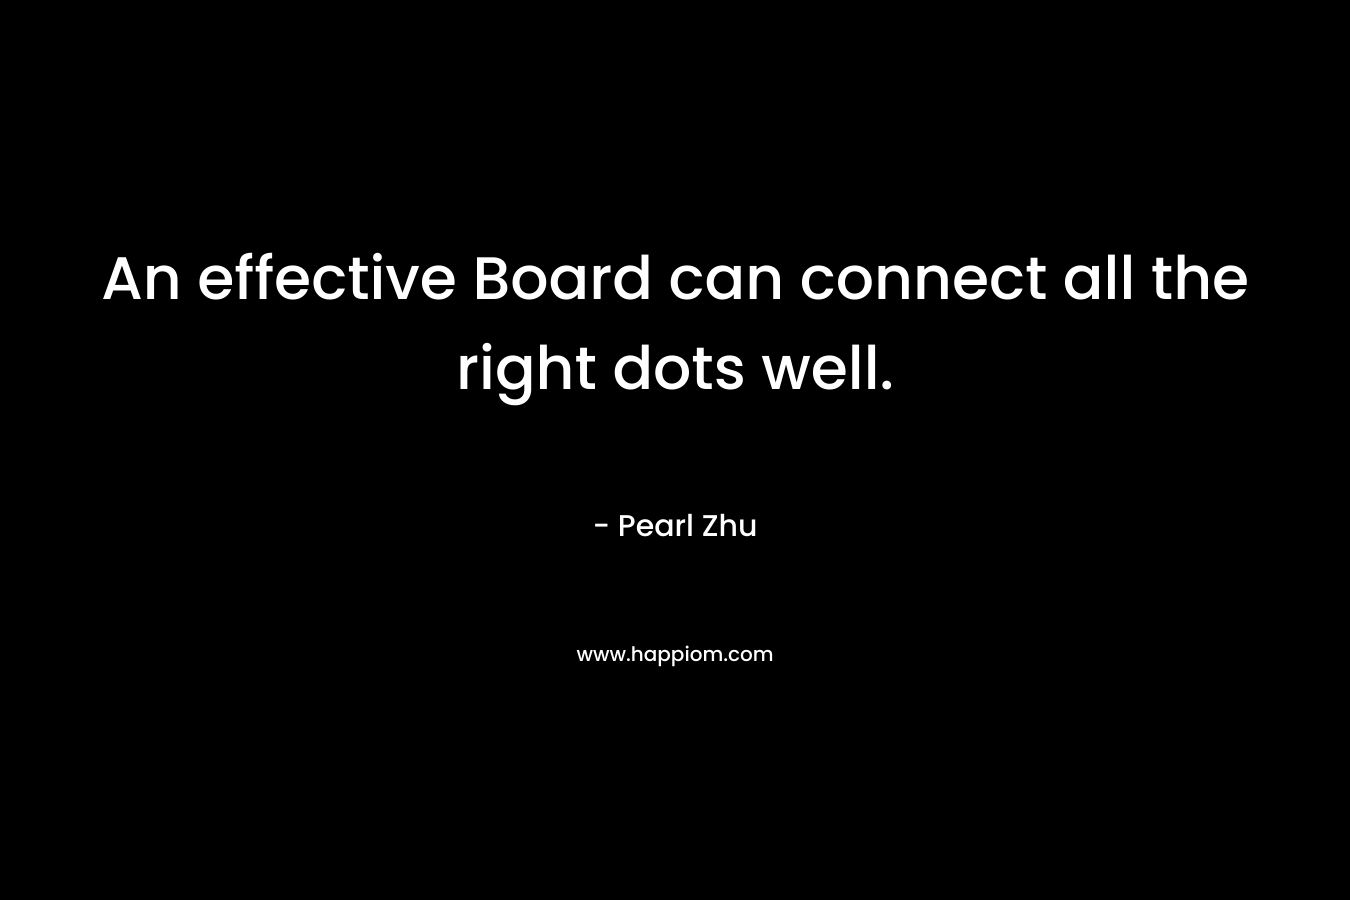 An effective Board can connect all the right dots well.